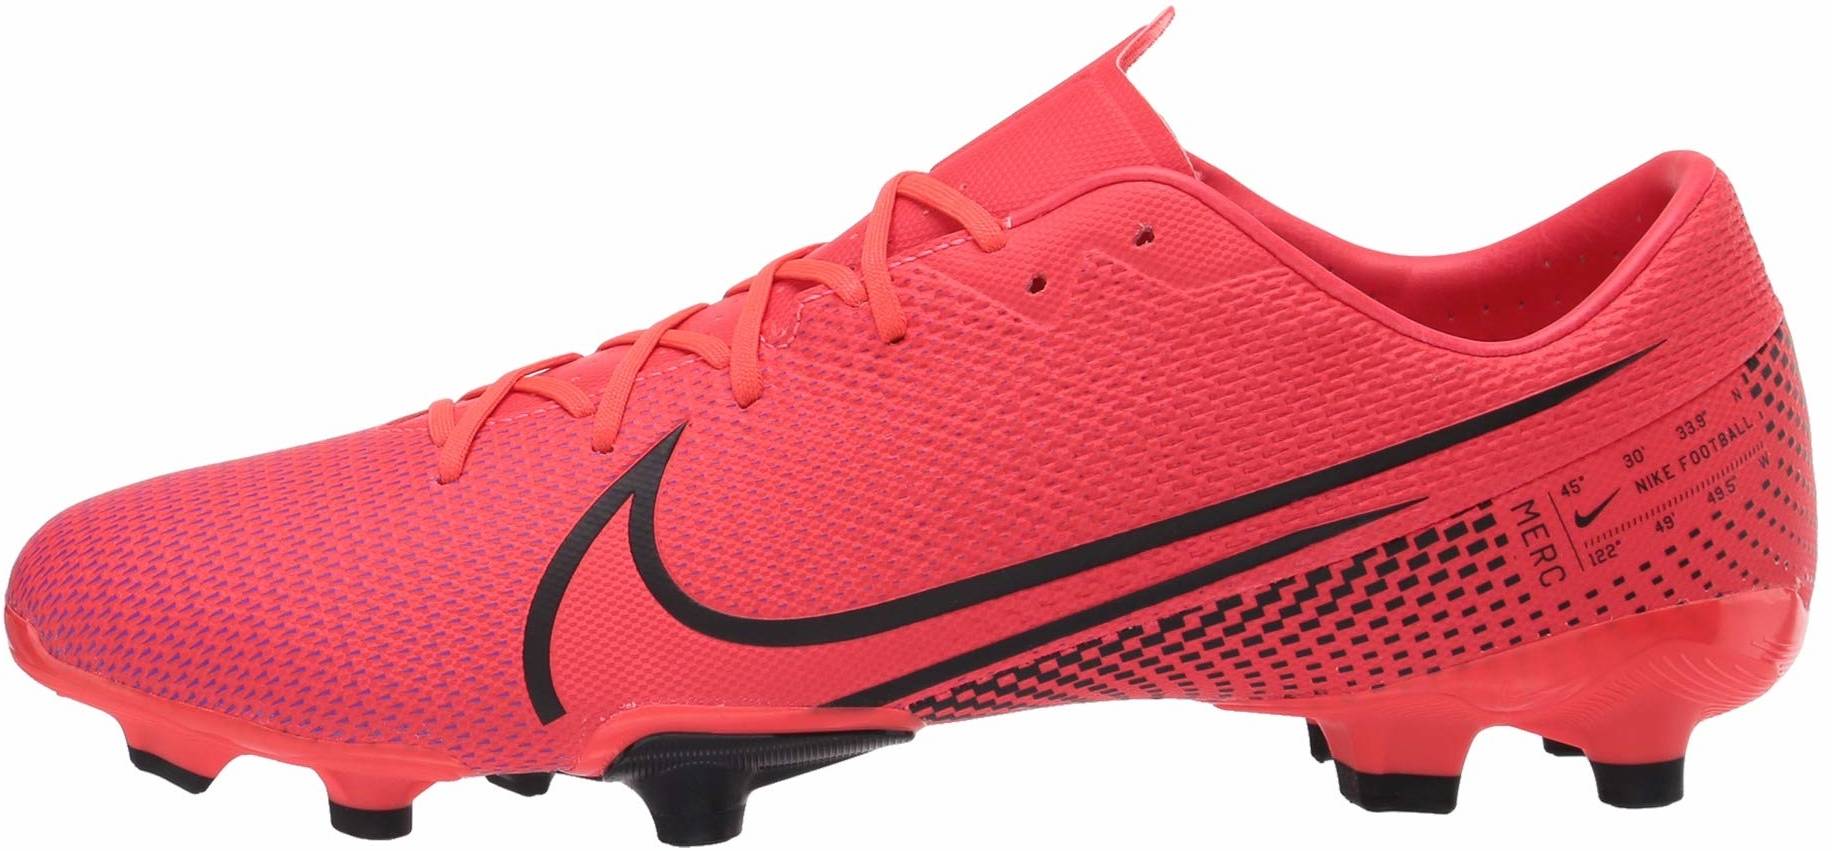 red nike soccer shoes